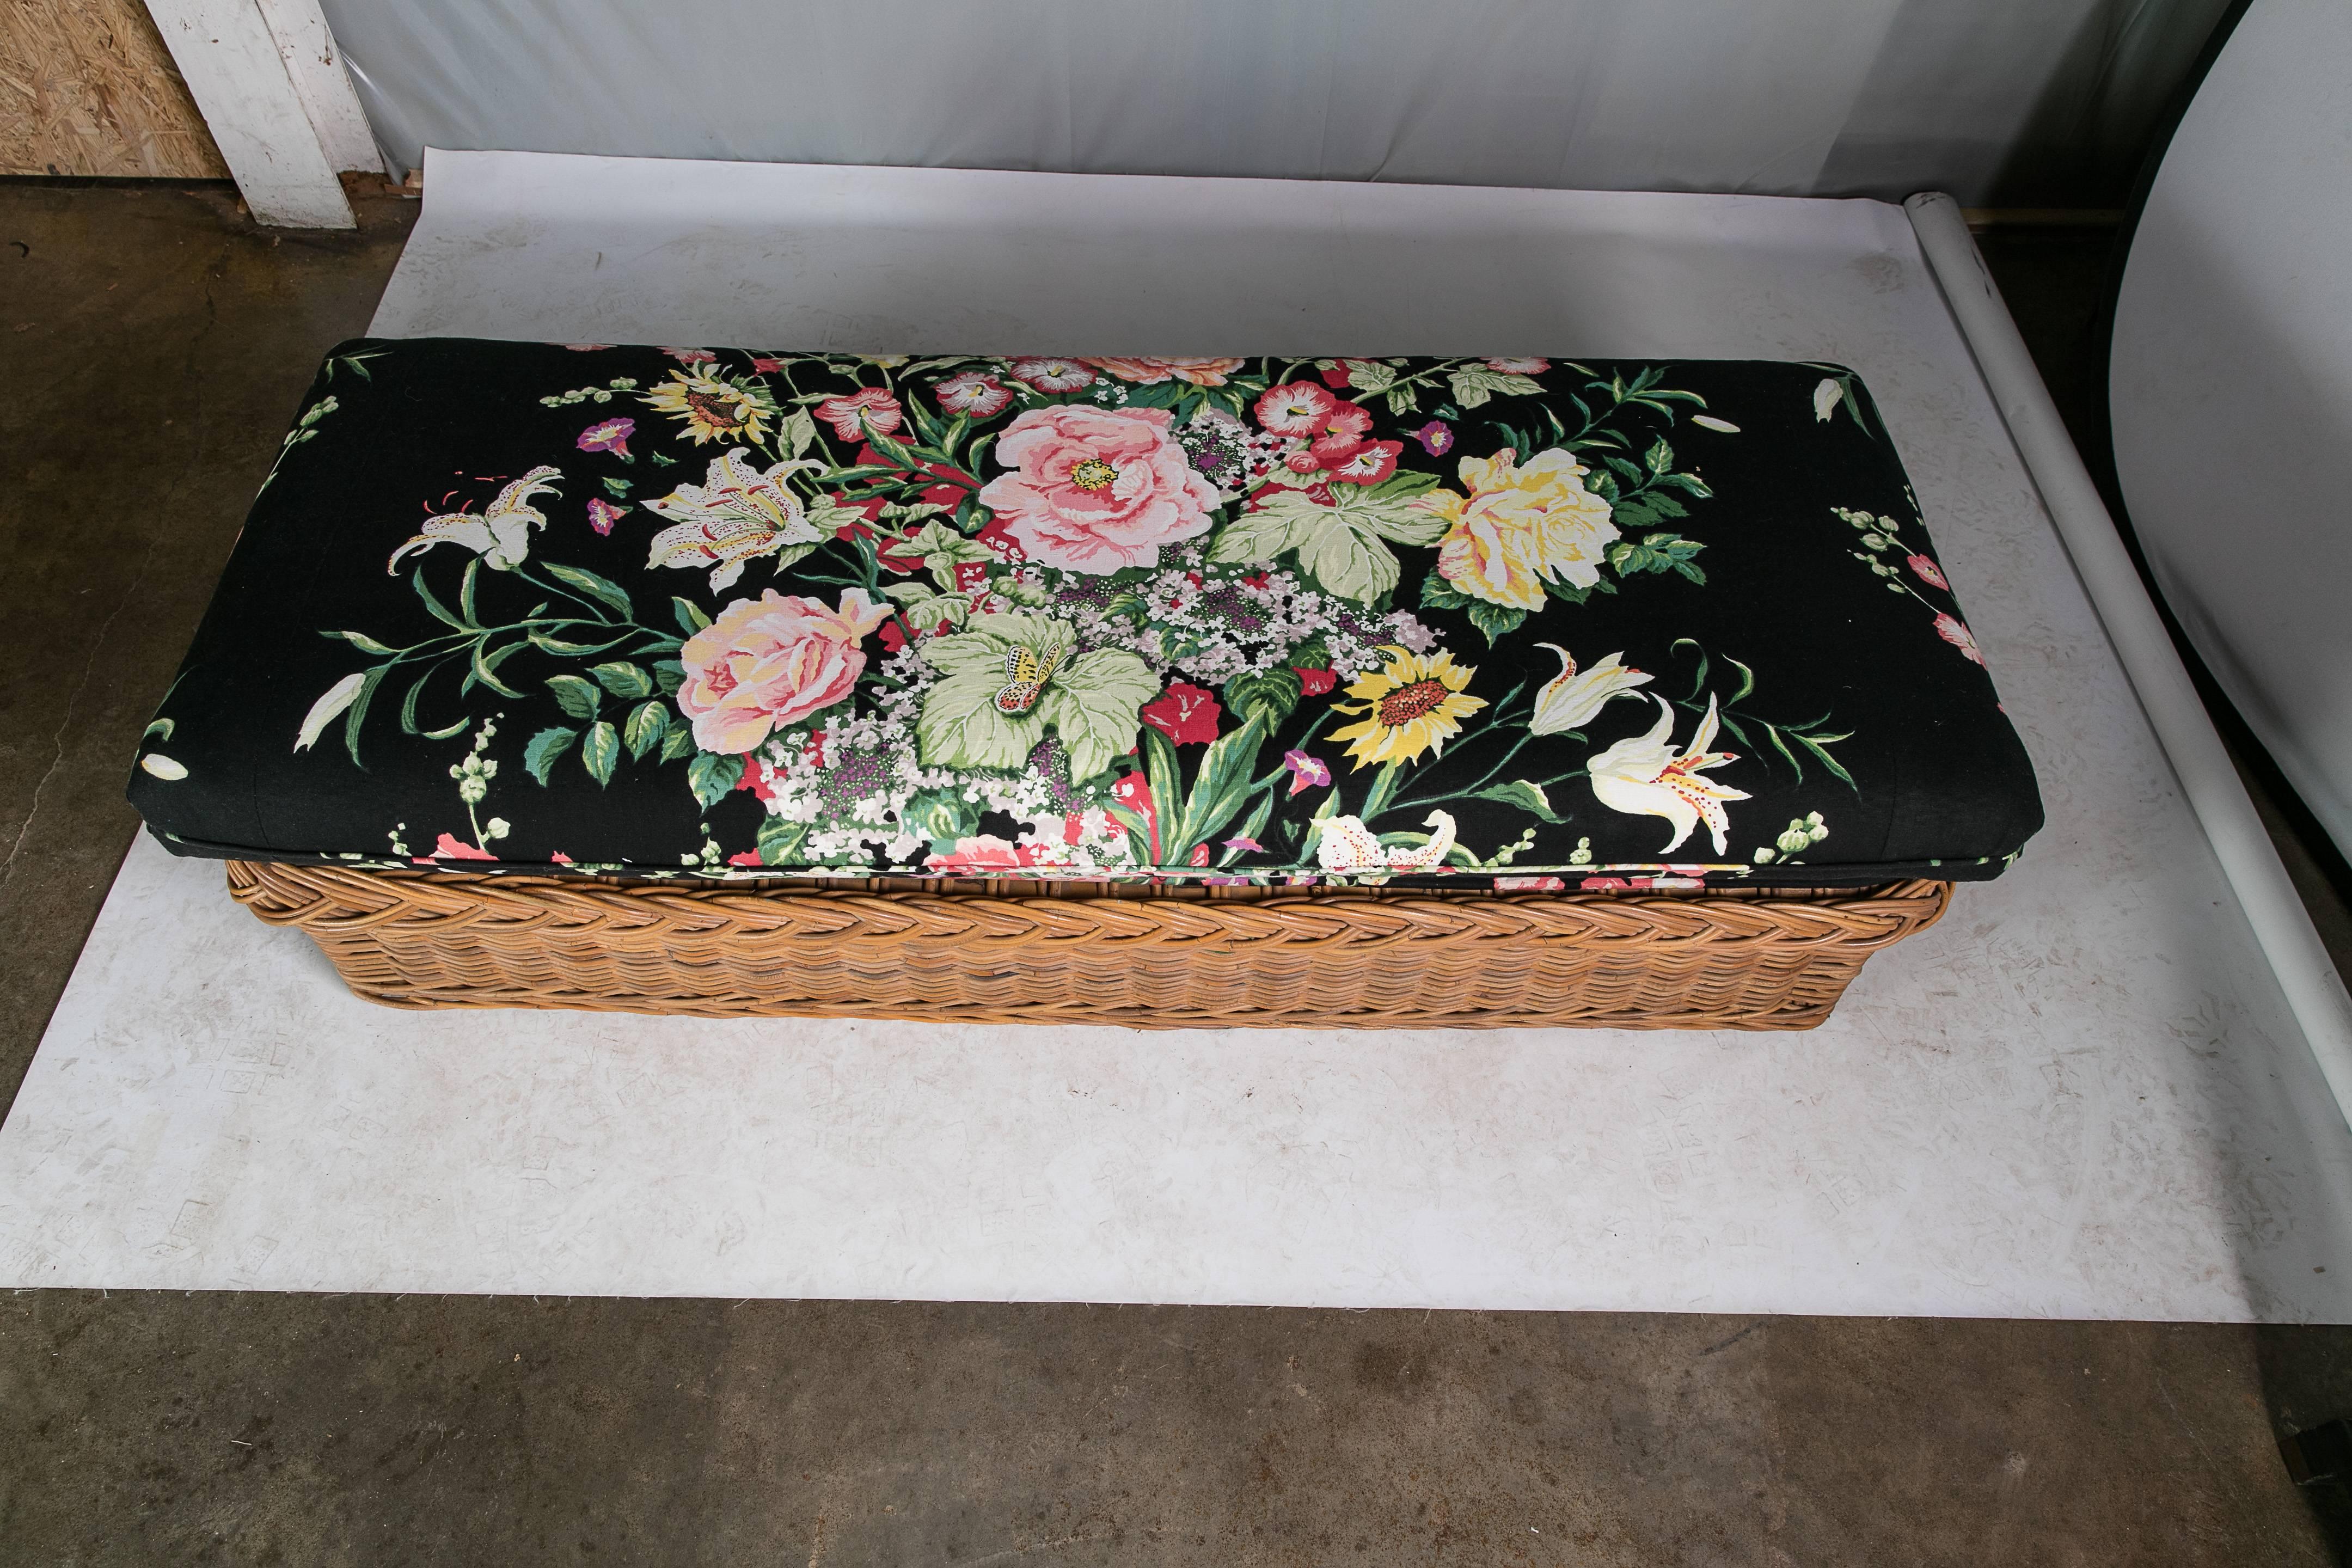 An Italian handwoven walnut-hued wicker bench with a loose rich black cotton cushion with a vibrant floral print. The cushion has a sturdy cotton wrapped foam interior. The deck under the cushion is upholstered in the same fabric as the cushion.